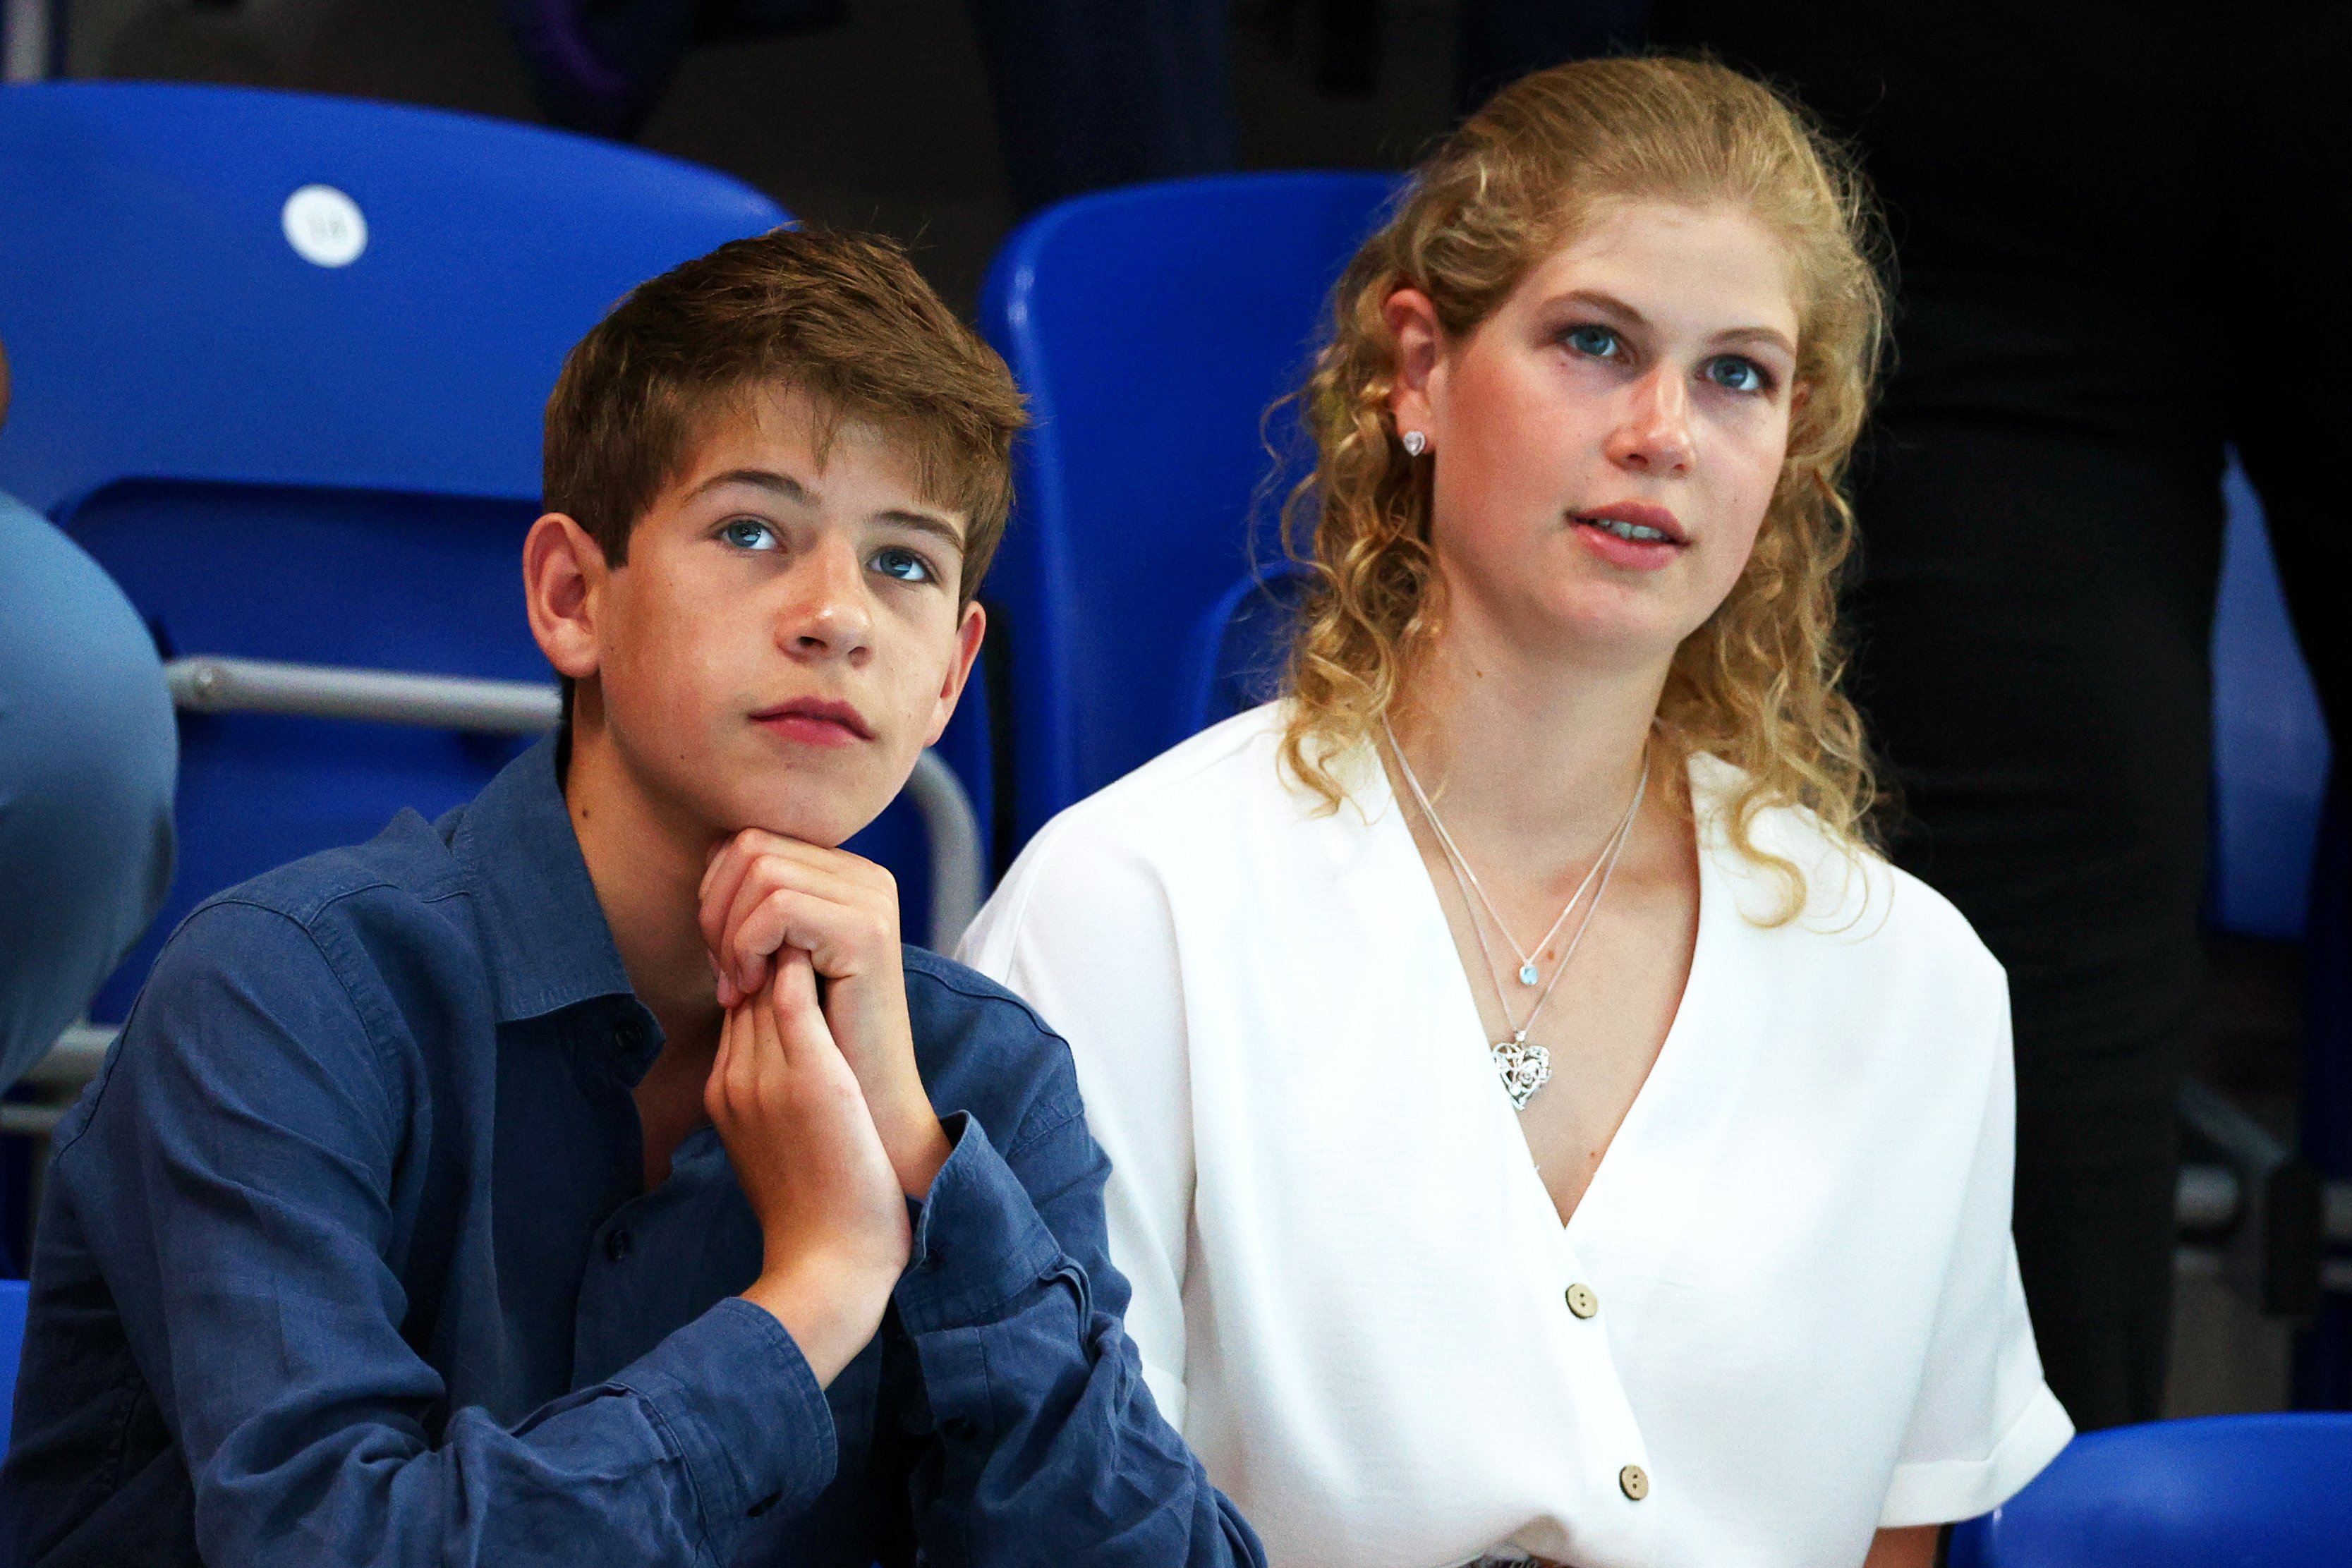 James, Viscount Severn and Lady Louise Windsor at the Sandwell Aquatics Center on August 02, 2022 in Smethwick, England.  |  Source: Getty Images